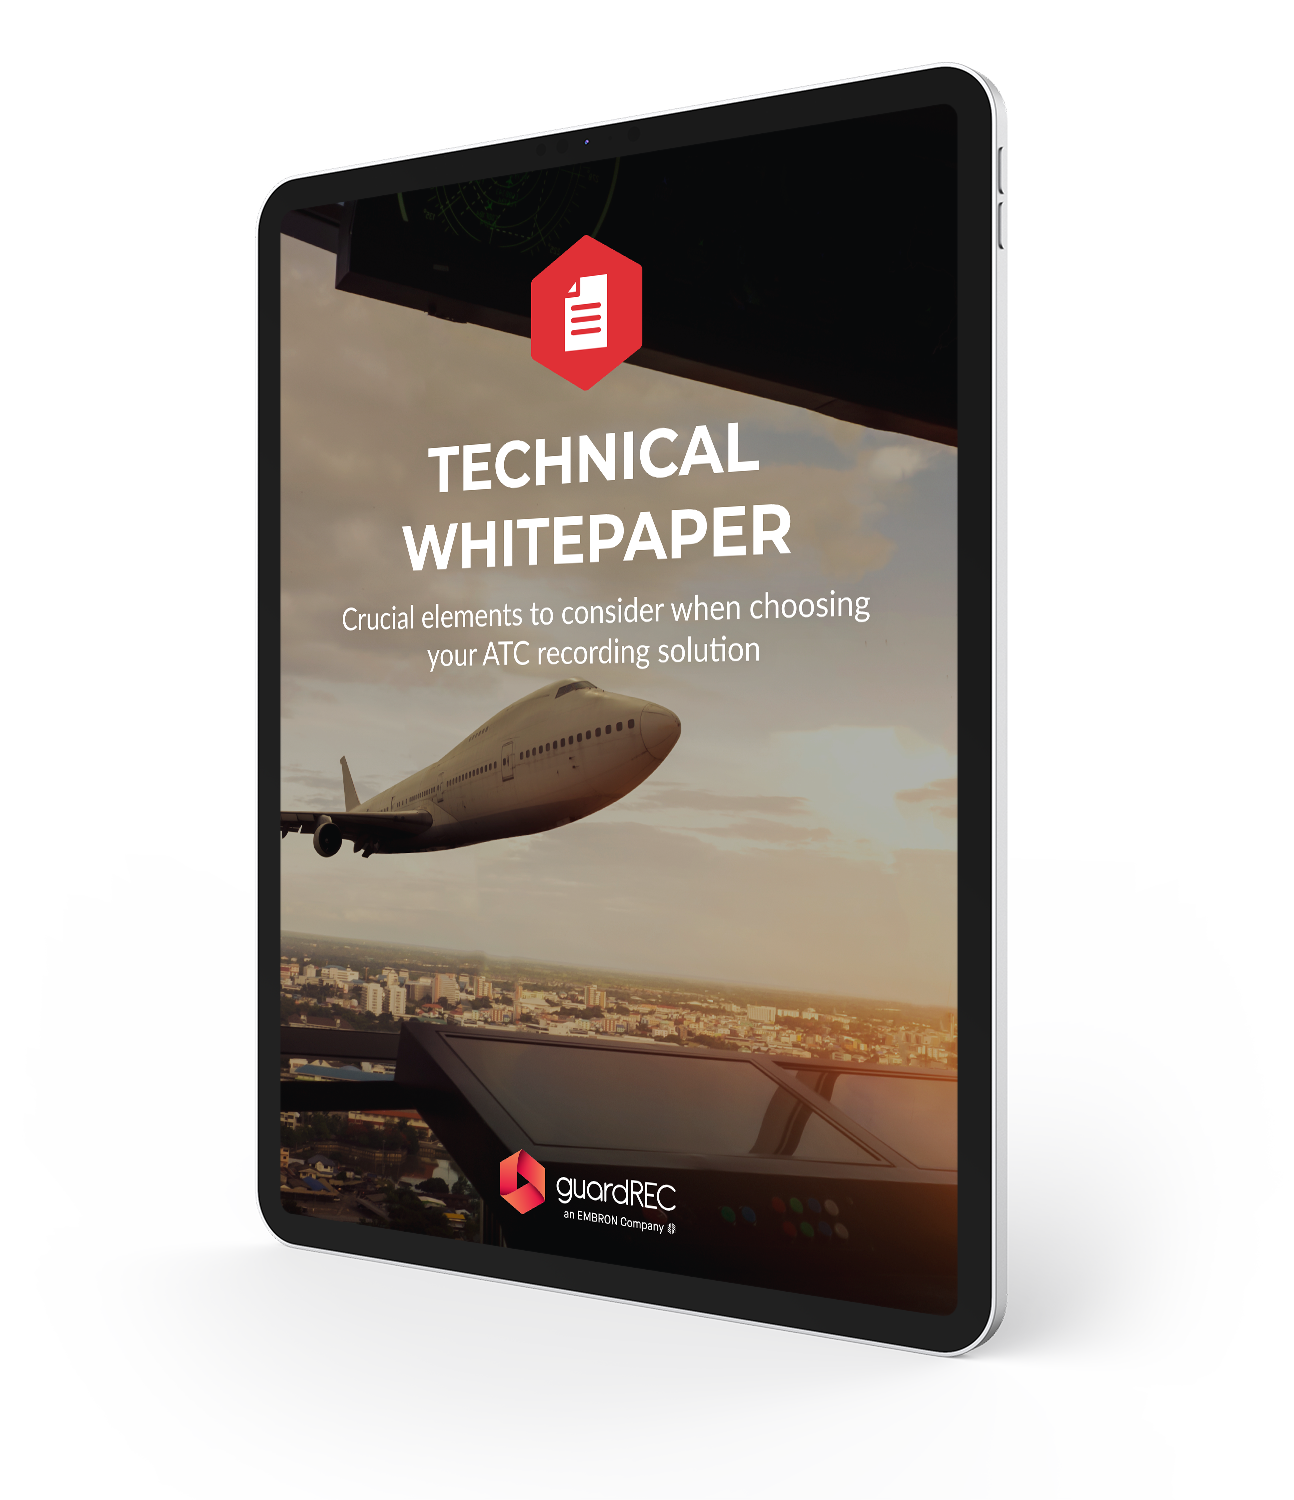 guardREC Technical whitepaper Crucial elements to consider when choosing your ATC recording solution. 